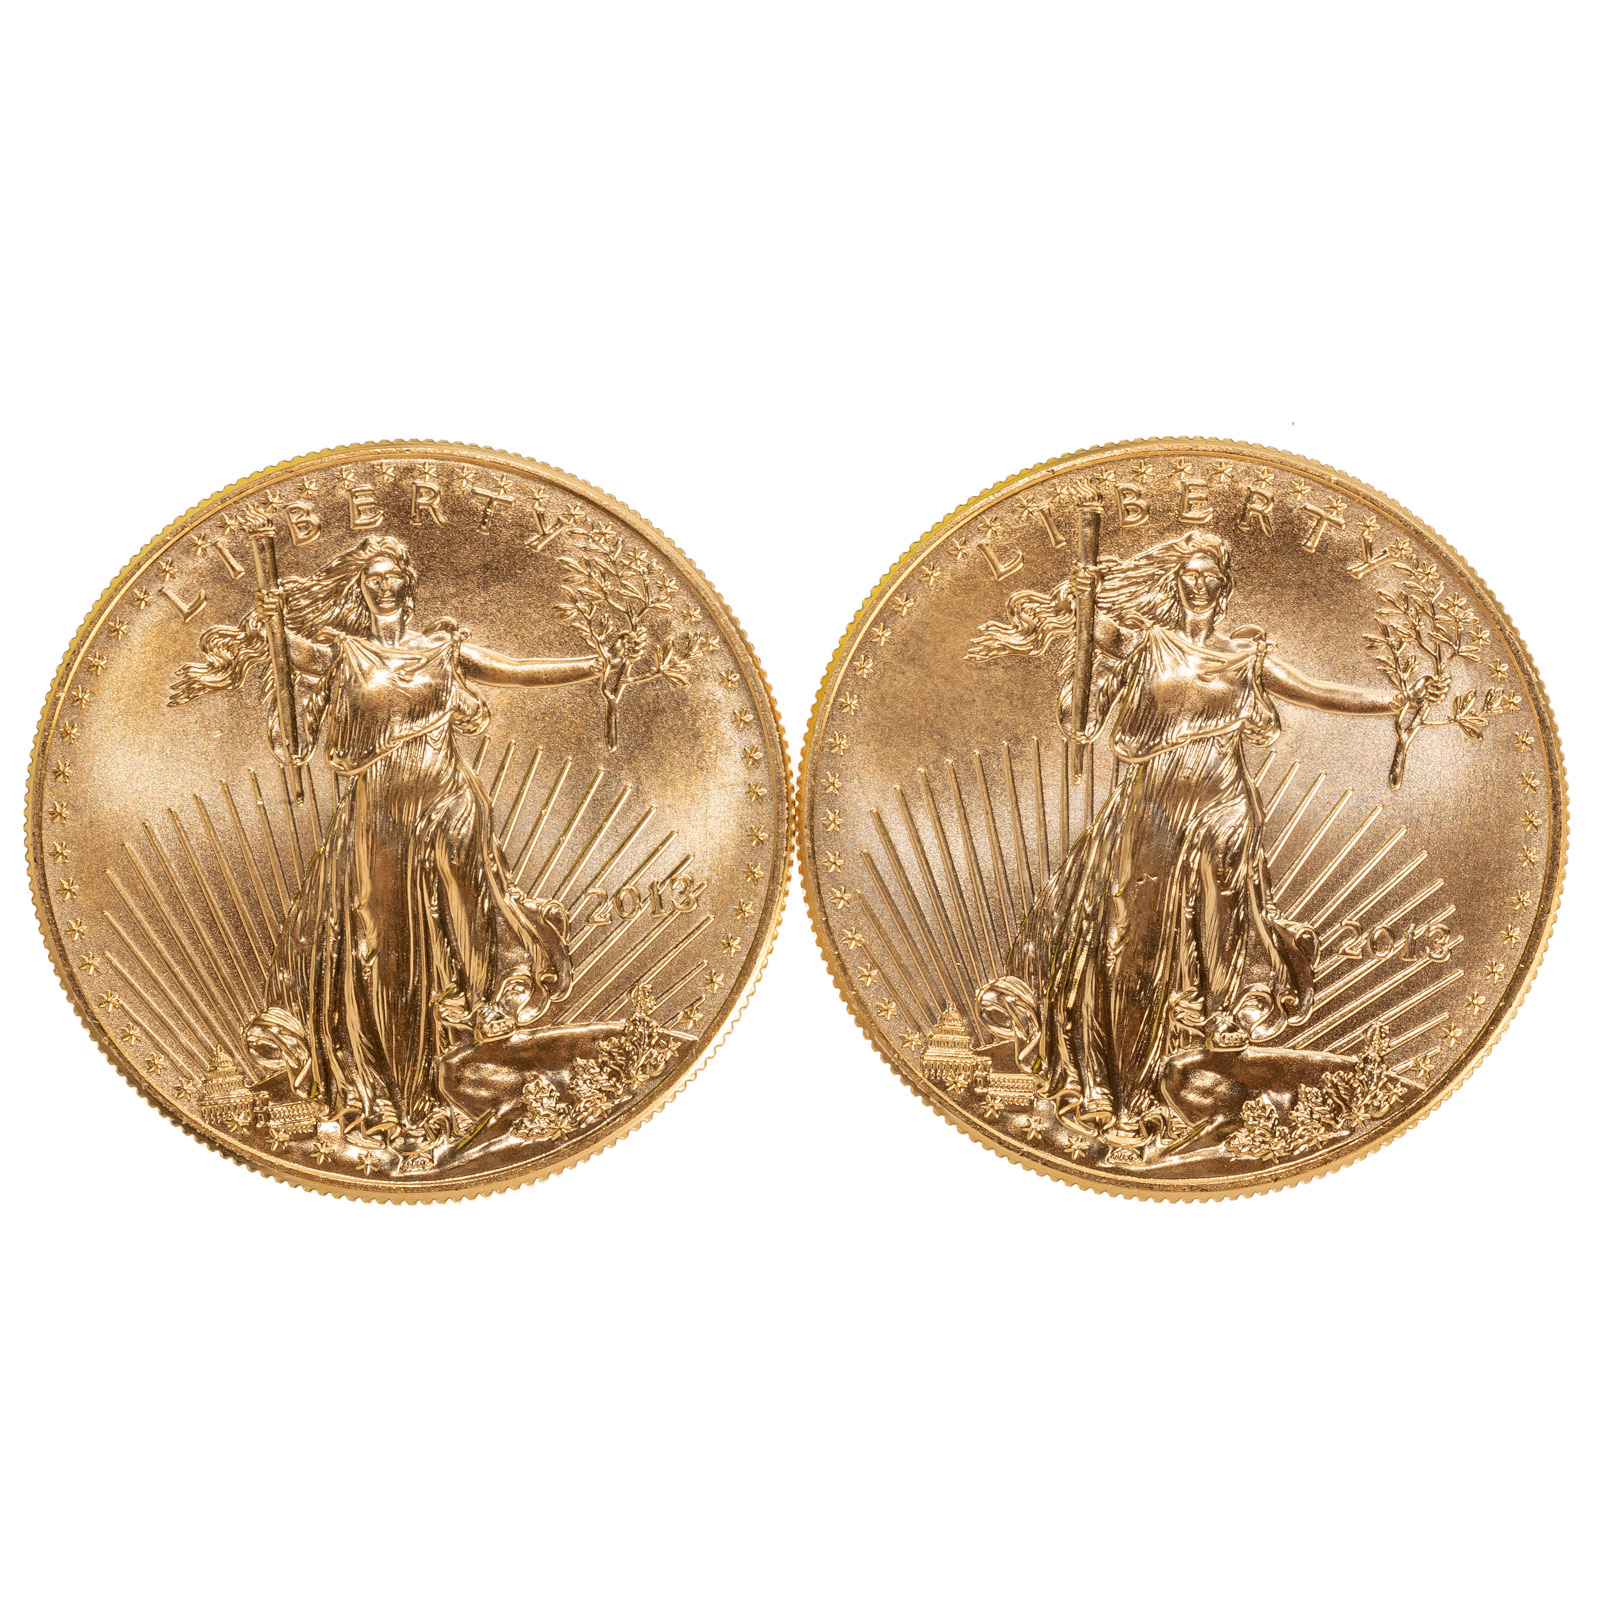 A PAIR OF 2013 1 OUNCE GOLD AMERICAN